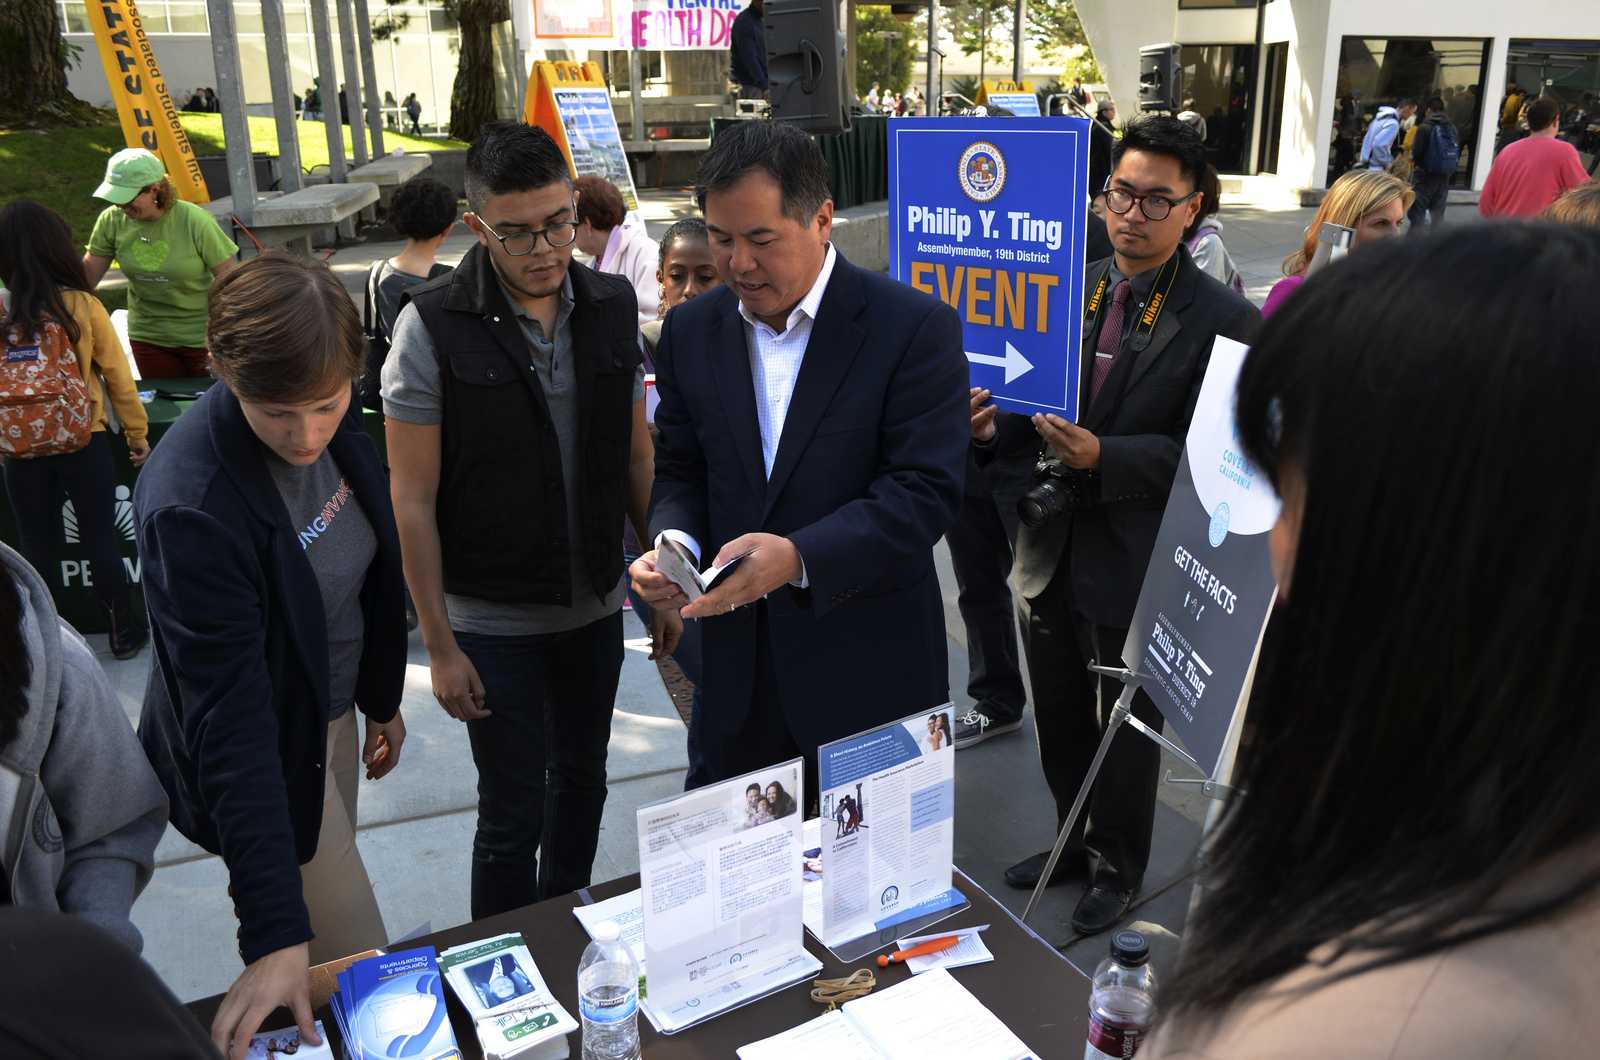 Ariel Boone and assembly member of district 19, Philip Y. Ting help explain the Affordable Care Act to SF State students at Cesar Chavez Plaza during an event Thursday, Oct. 10, 2013 in the afternoon. Photo by Amanda Peterson / Xpress 